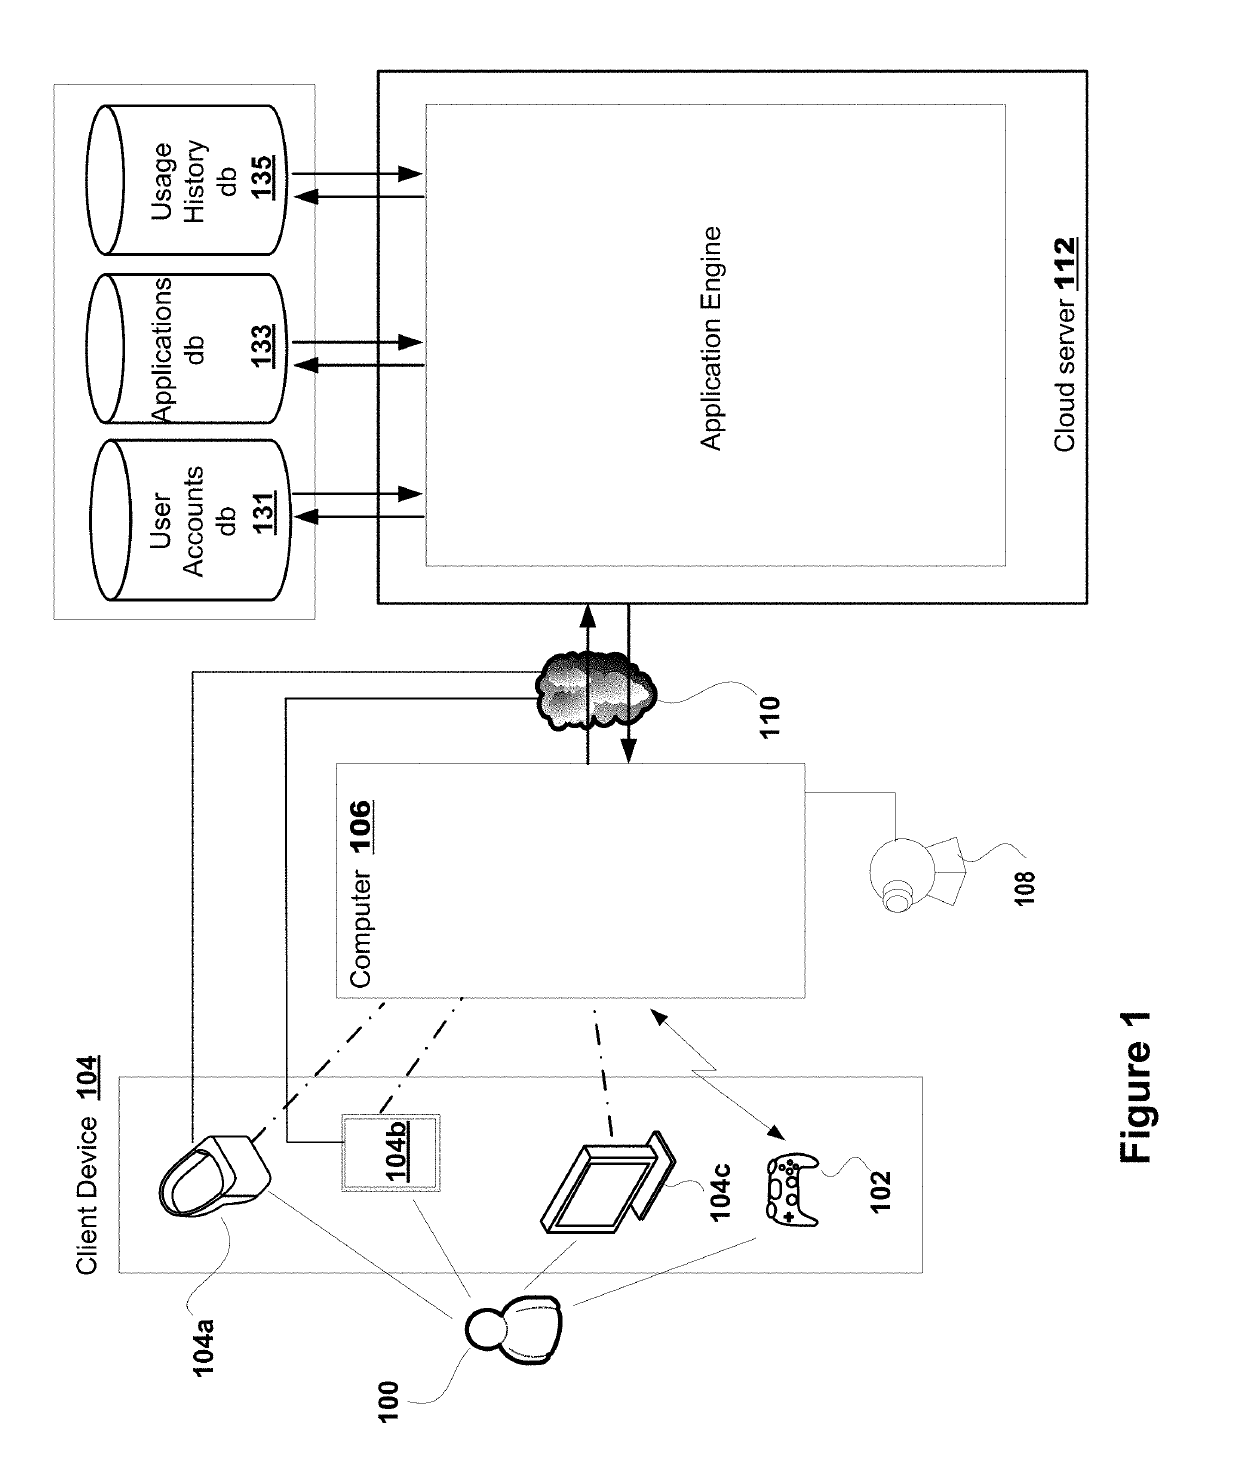 Methods And Systems For Providing Shortcuts For Fast Load When Moving Between Scenes In Virtual Reality